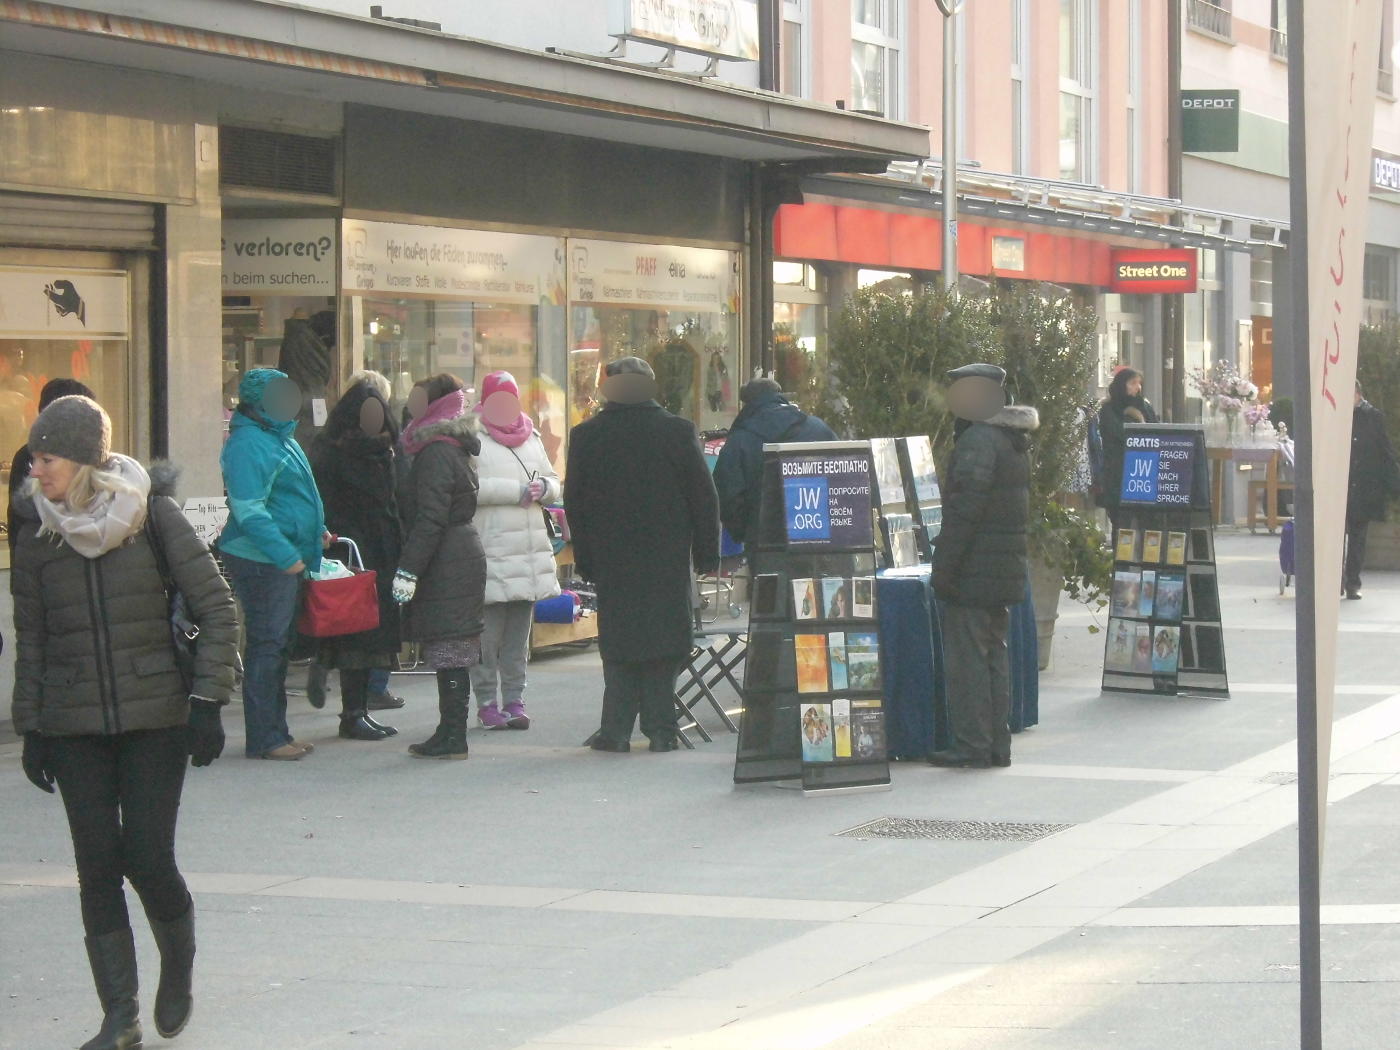 Bruchsal Jehovah's Witnesses consider themselves wise